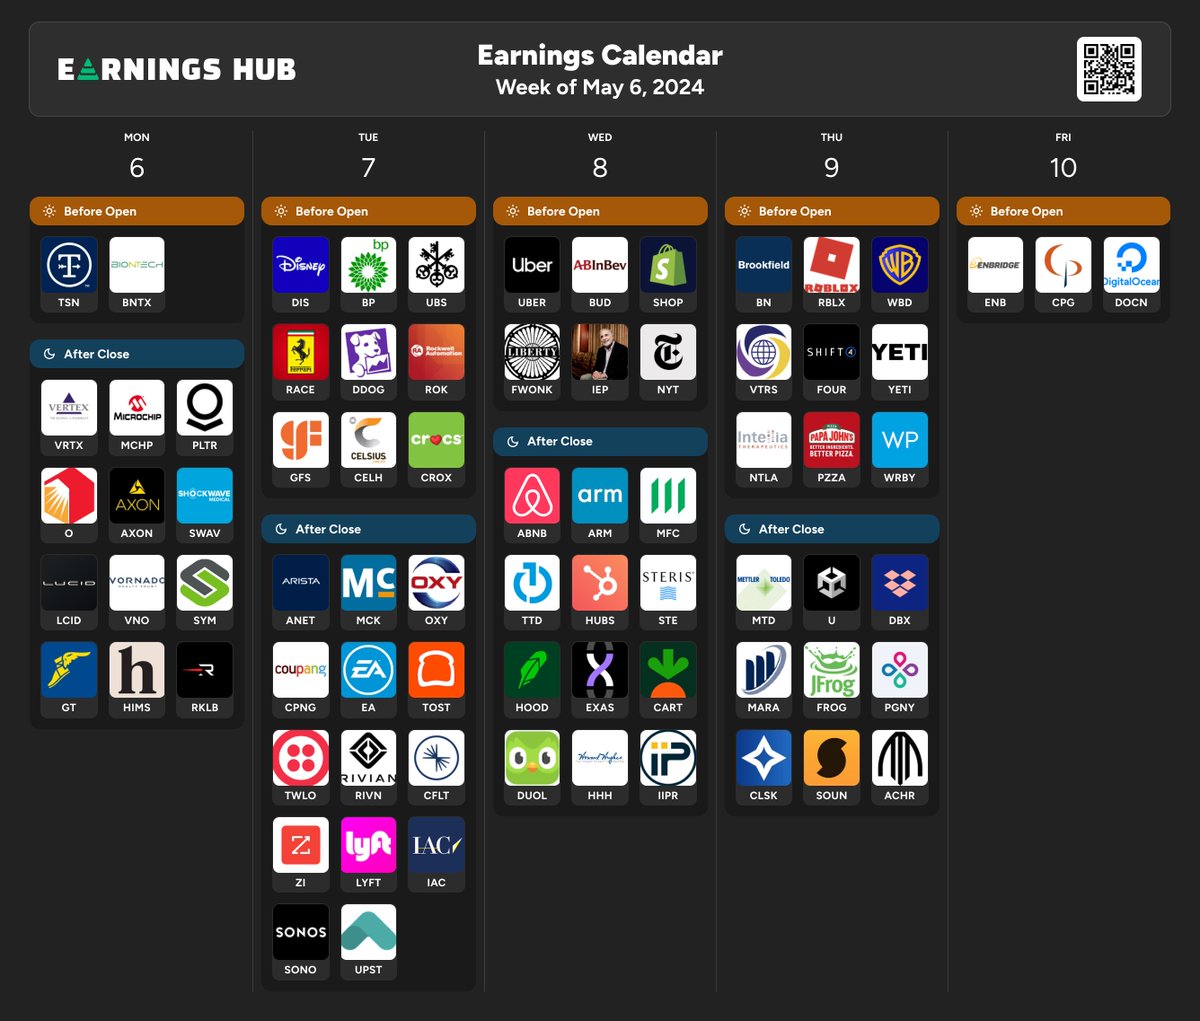 Schedule of earnings for this upcoming week ... here are some of the largest earnings incoming

Monday: Palantir $PLTR

Tuesday: Disney $DIS, Celsius $CELH, Datadog $DDOG, Rivian $RIVN

Wednesday: $UBER, Shopify $SHOP, Airbnb $ABNB, Arm Holdings $ARM, Trade Desk $TTD, Robinhood…